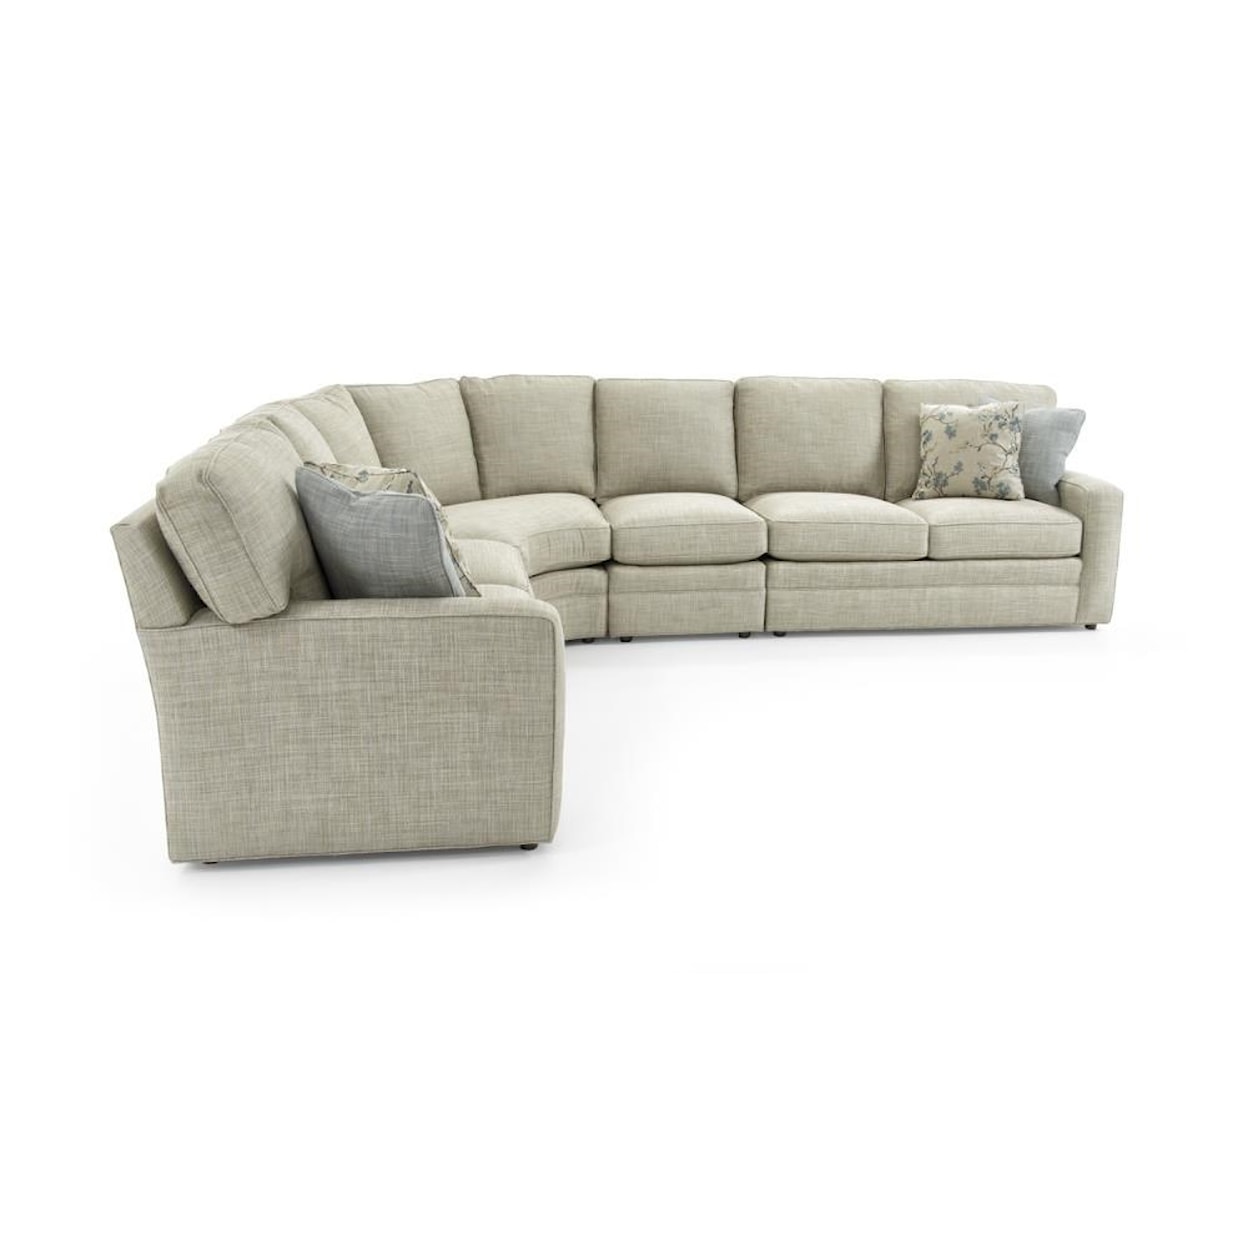 Sherrill Design Your Own 4 Pc Sectional Sofa